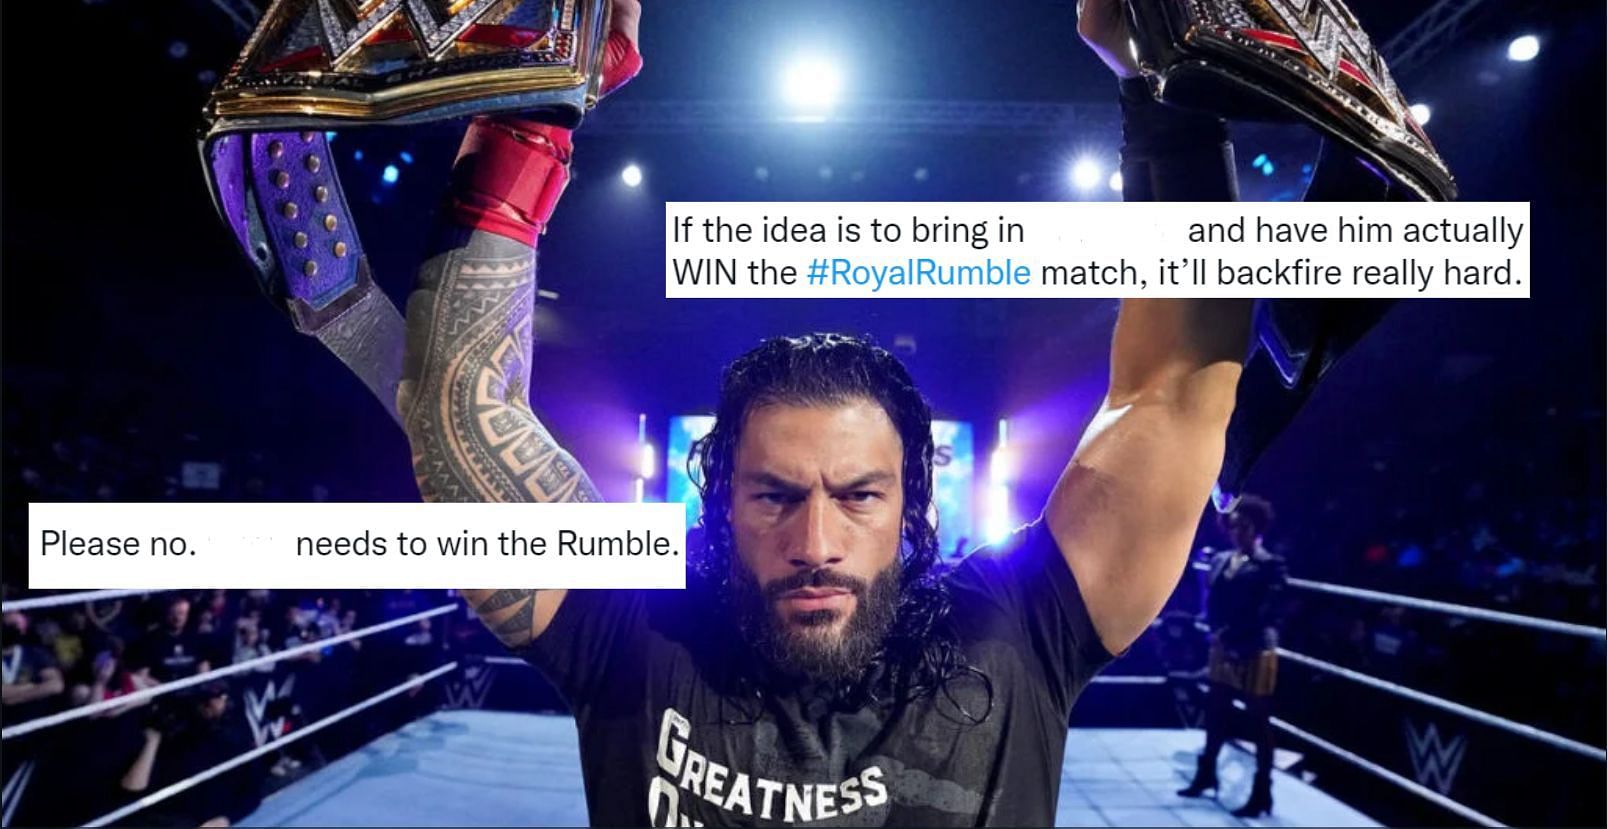 Roman Reigns will likely face the Royal Rumble winner at WrestleMania.